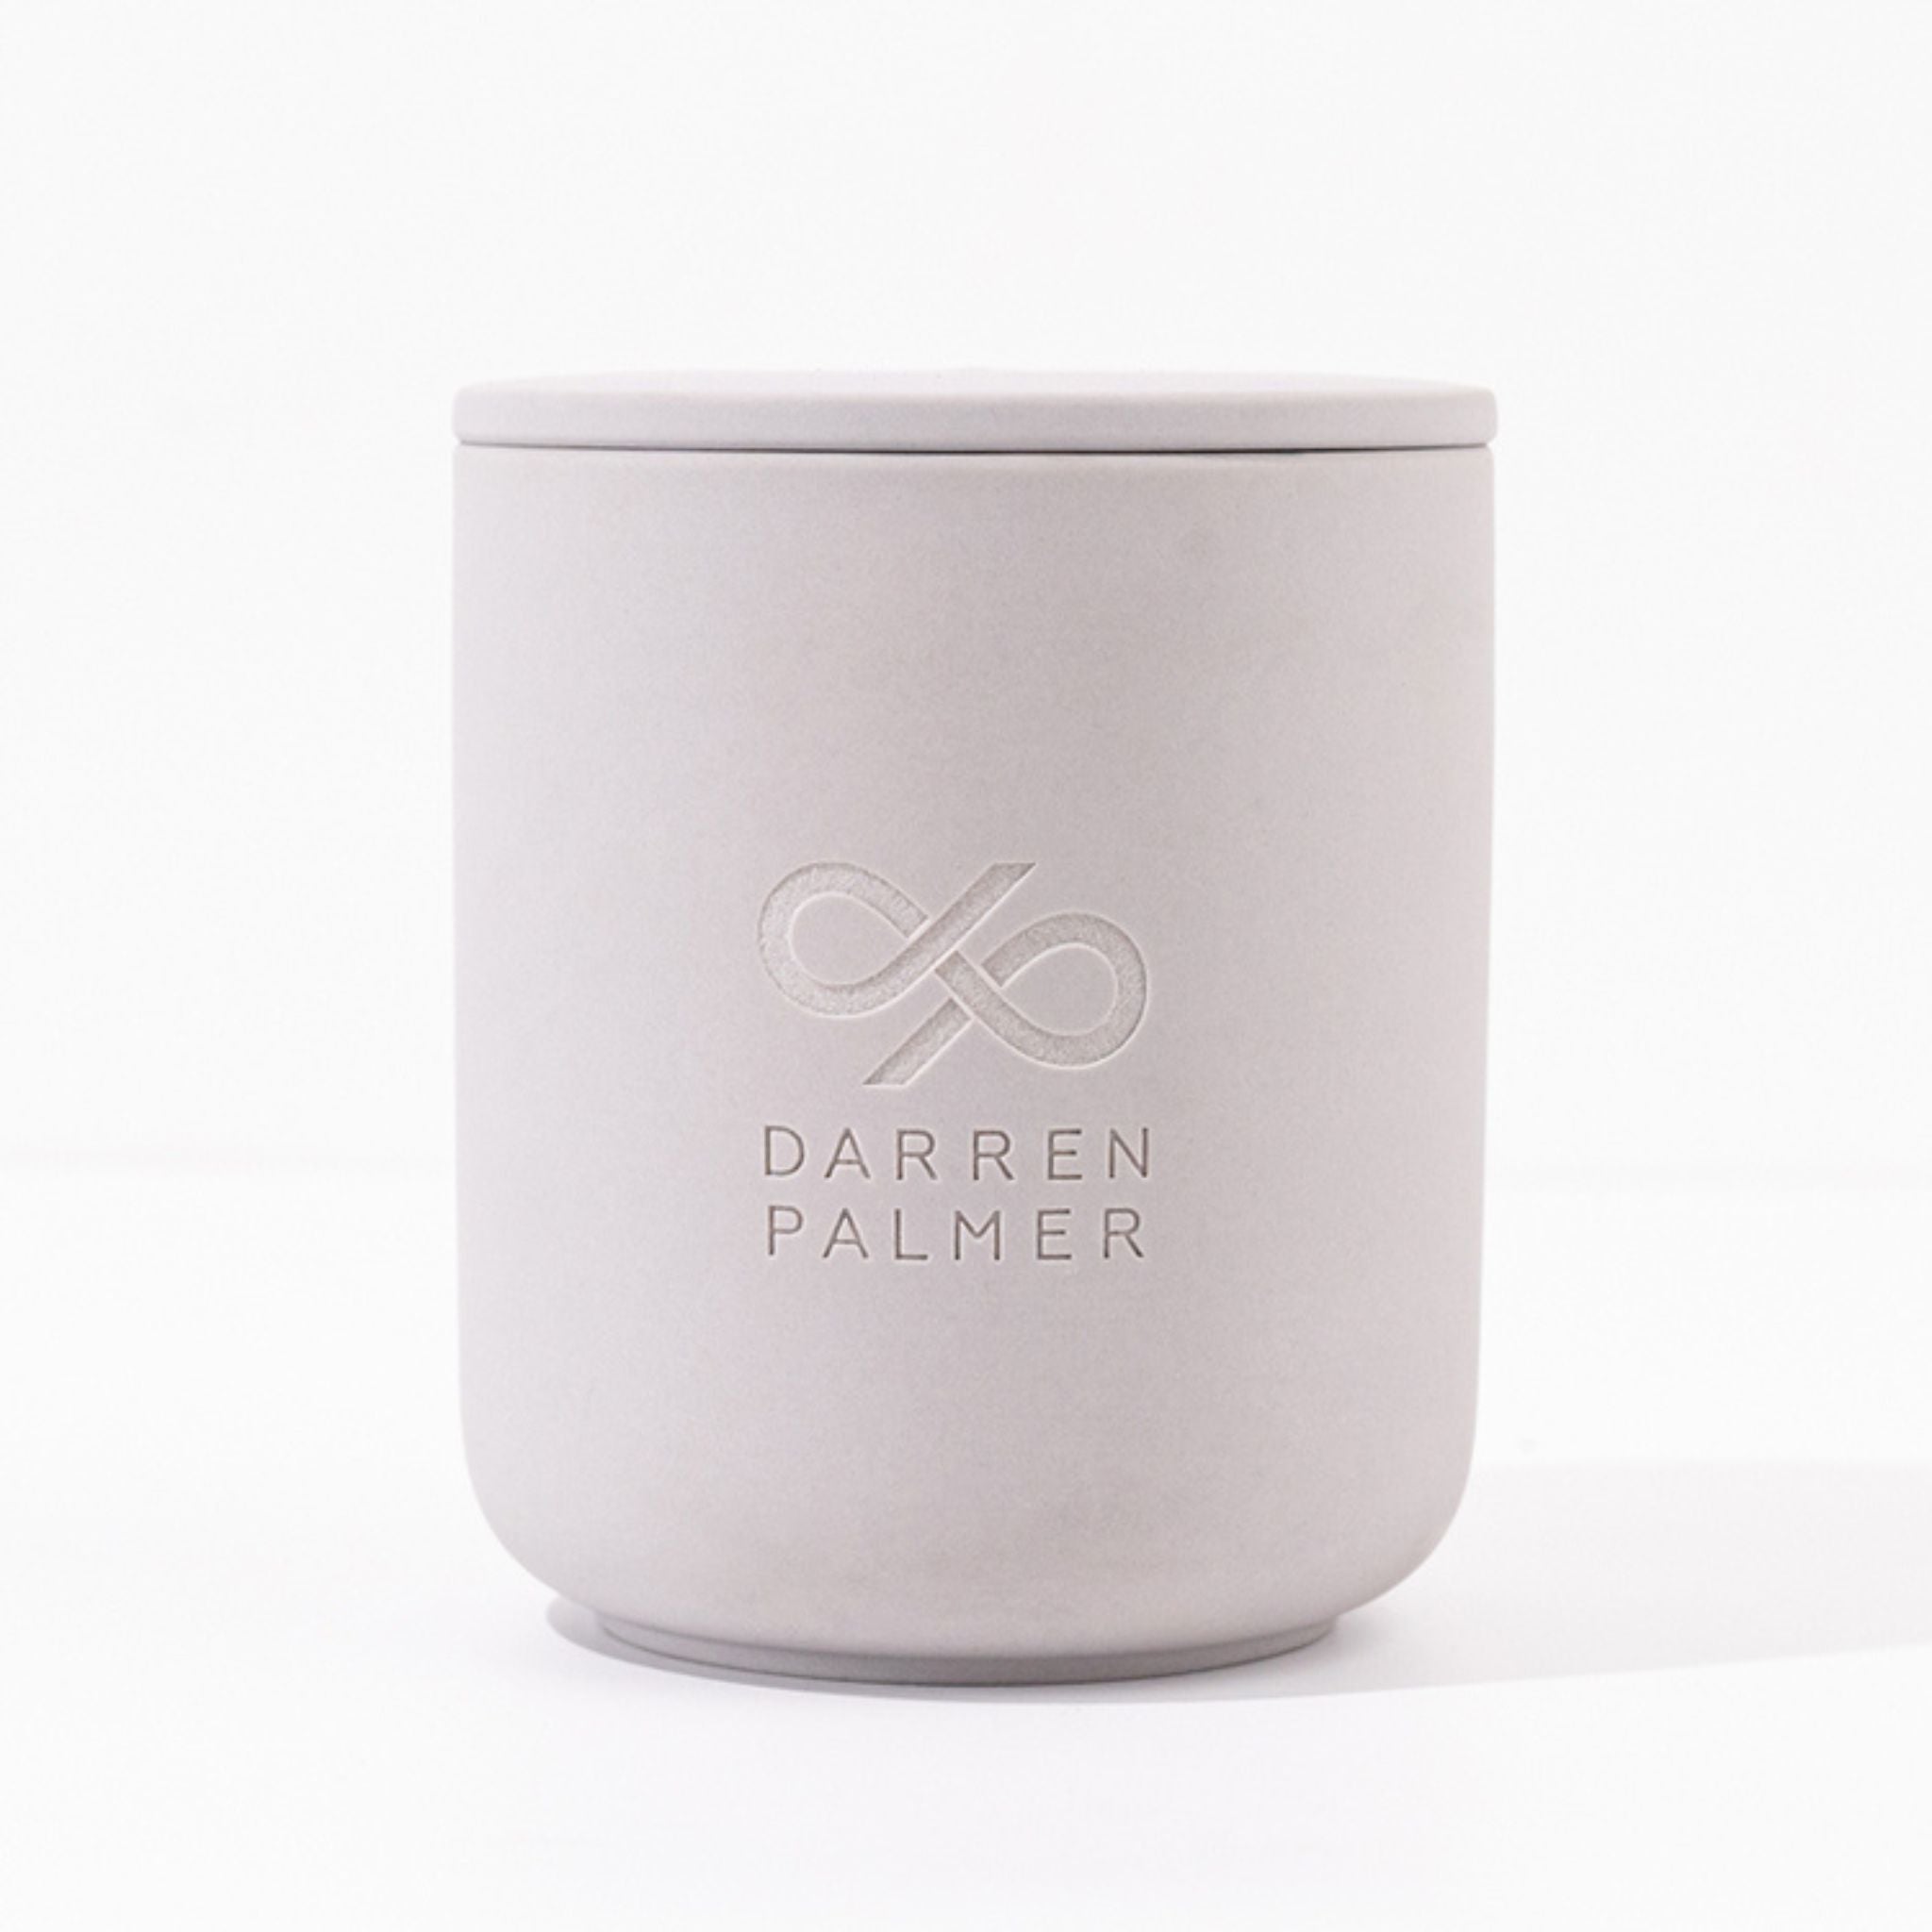 HAPPY HOUR - Scented Candle | Designed by Darren Palmer - Contemporary Co Australian Made Gift Store